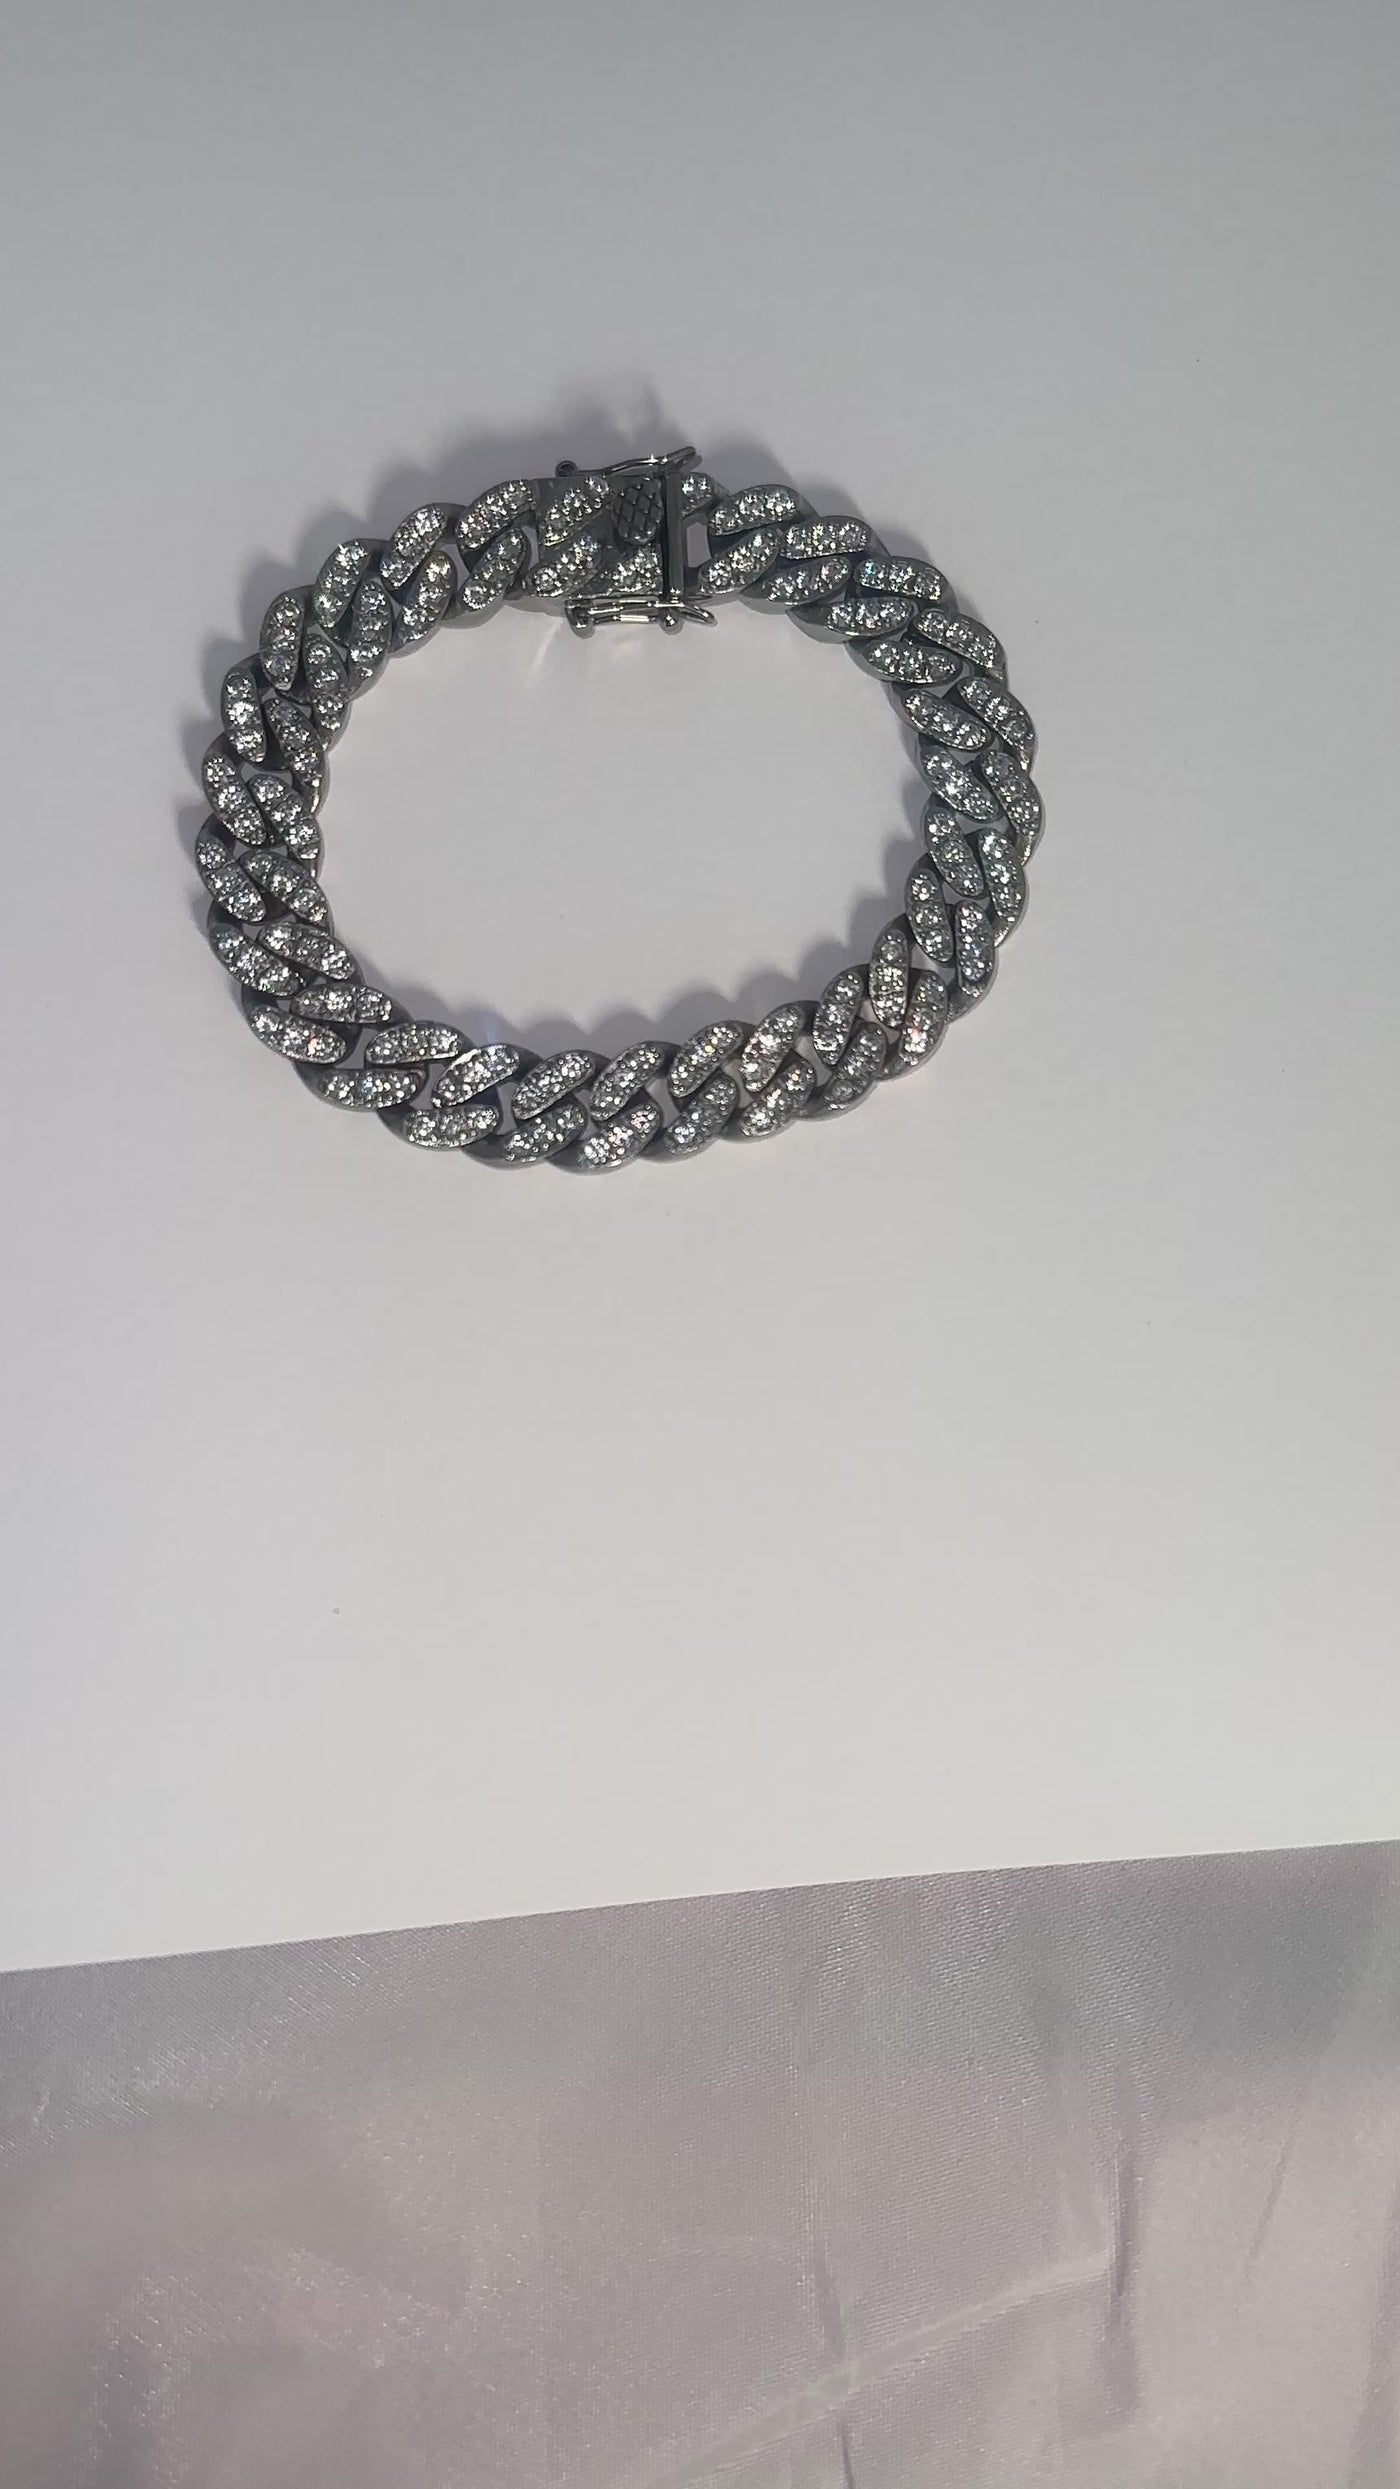 Iced Bracelet Silver Silver Stainless Steel